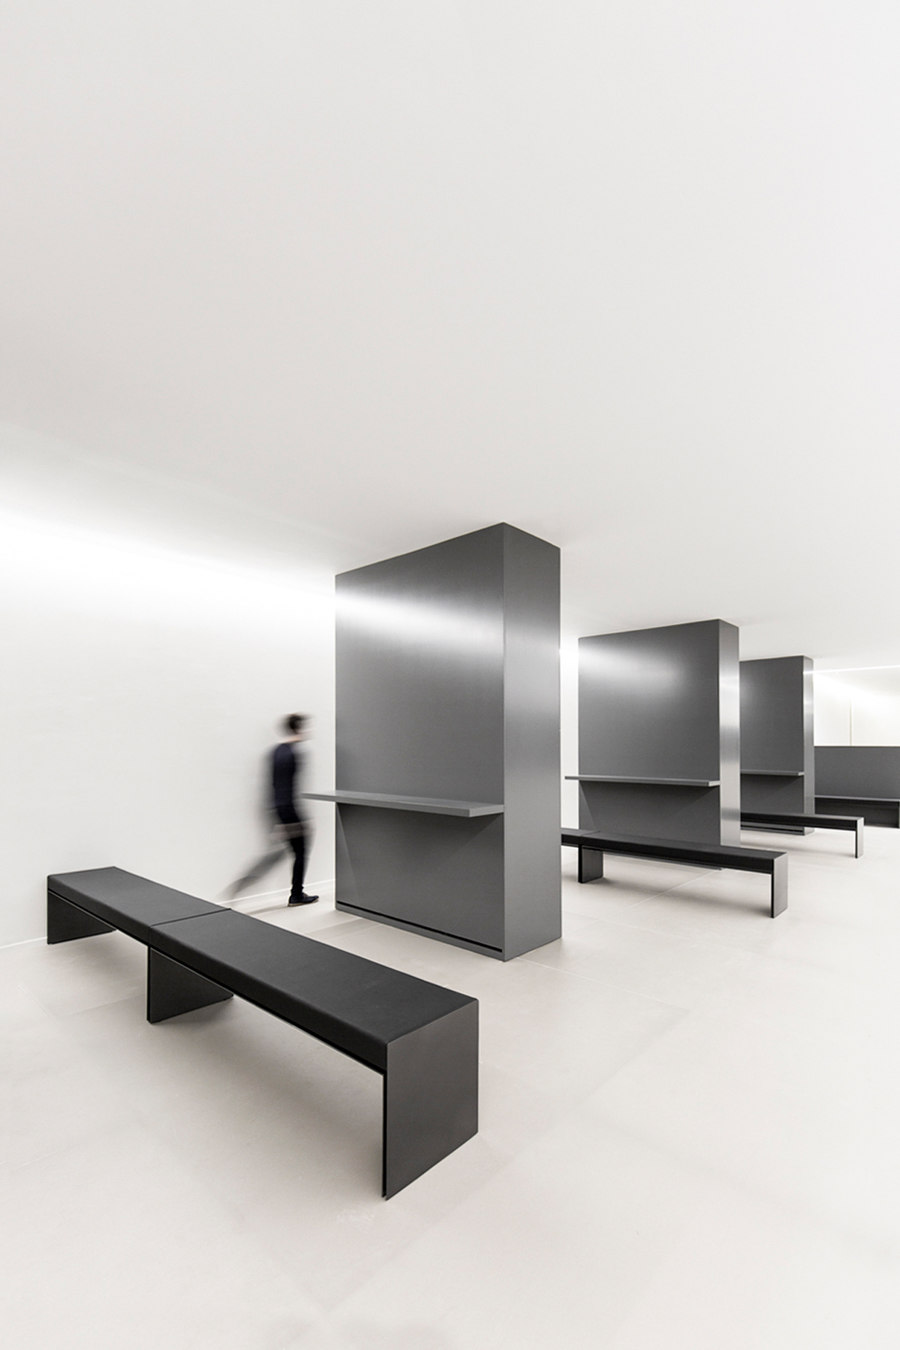 ARV Offices by Fran Silvestre Arquitectos | Office facilities